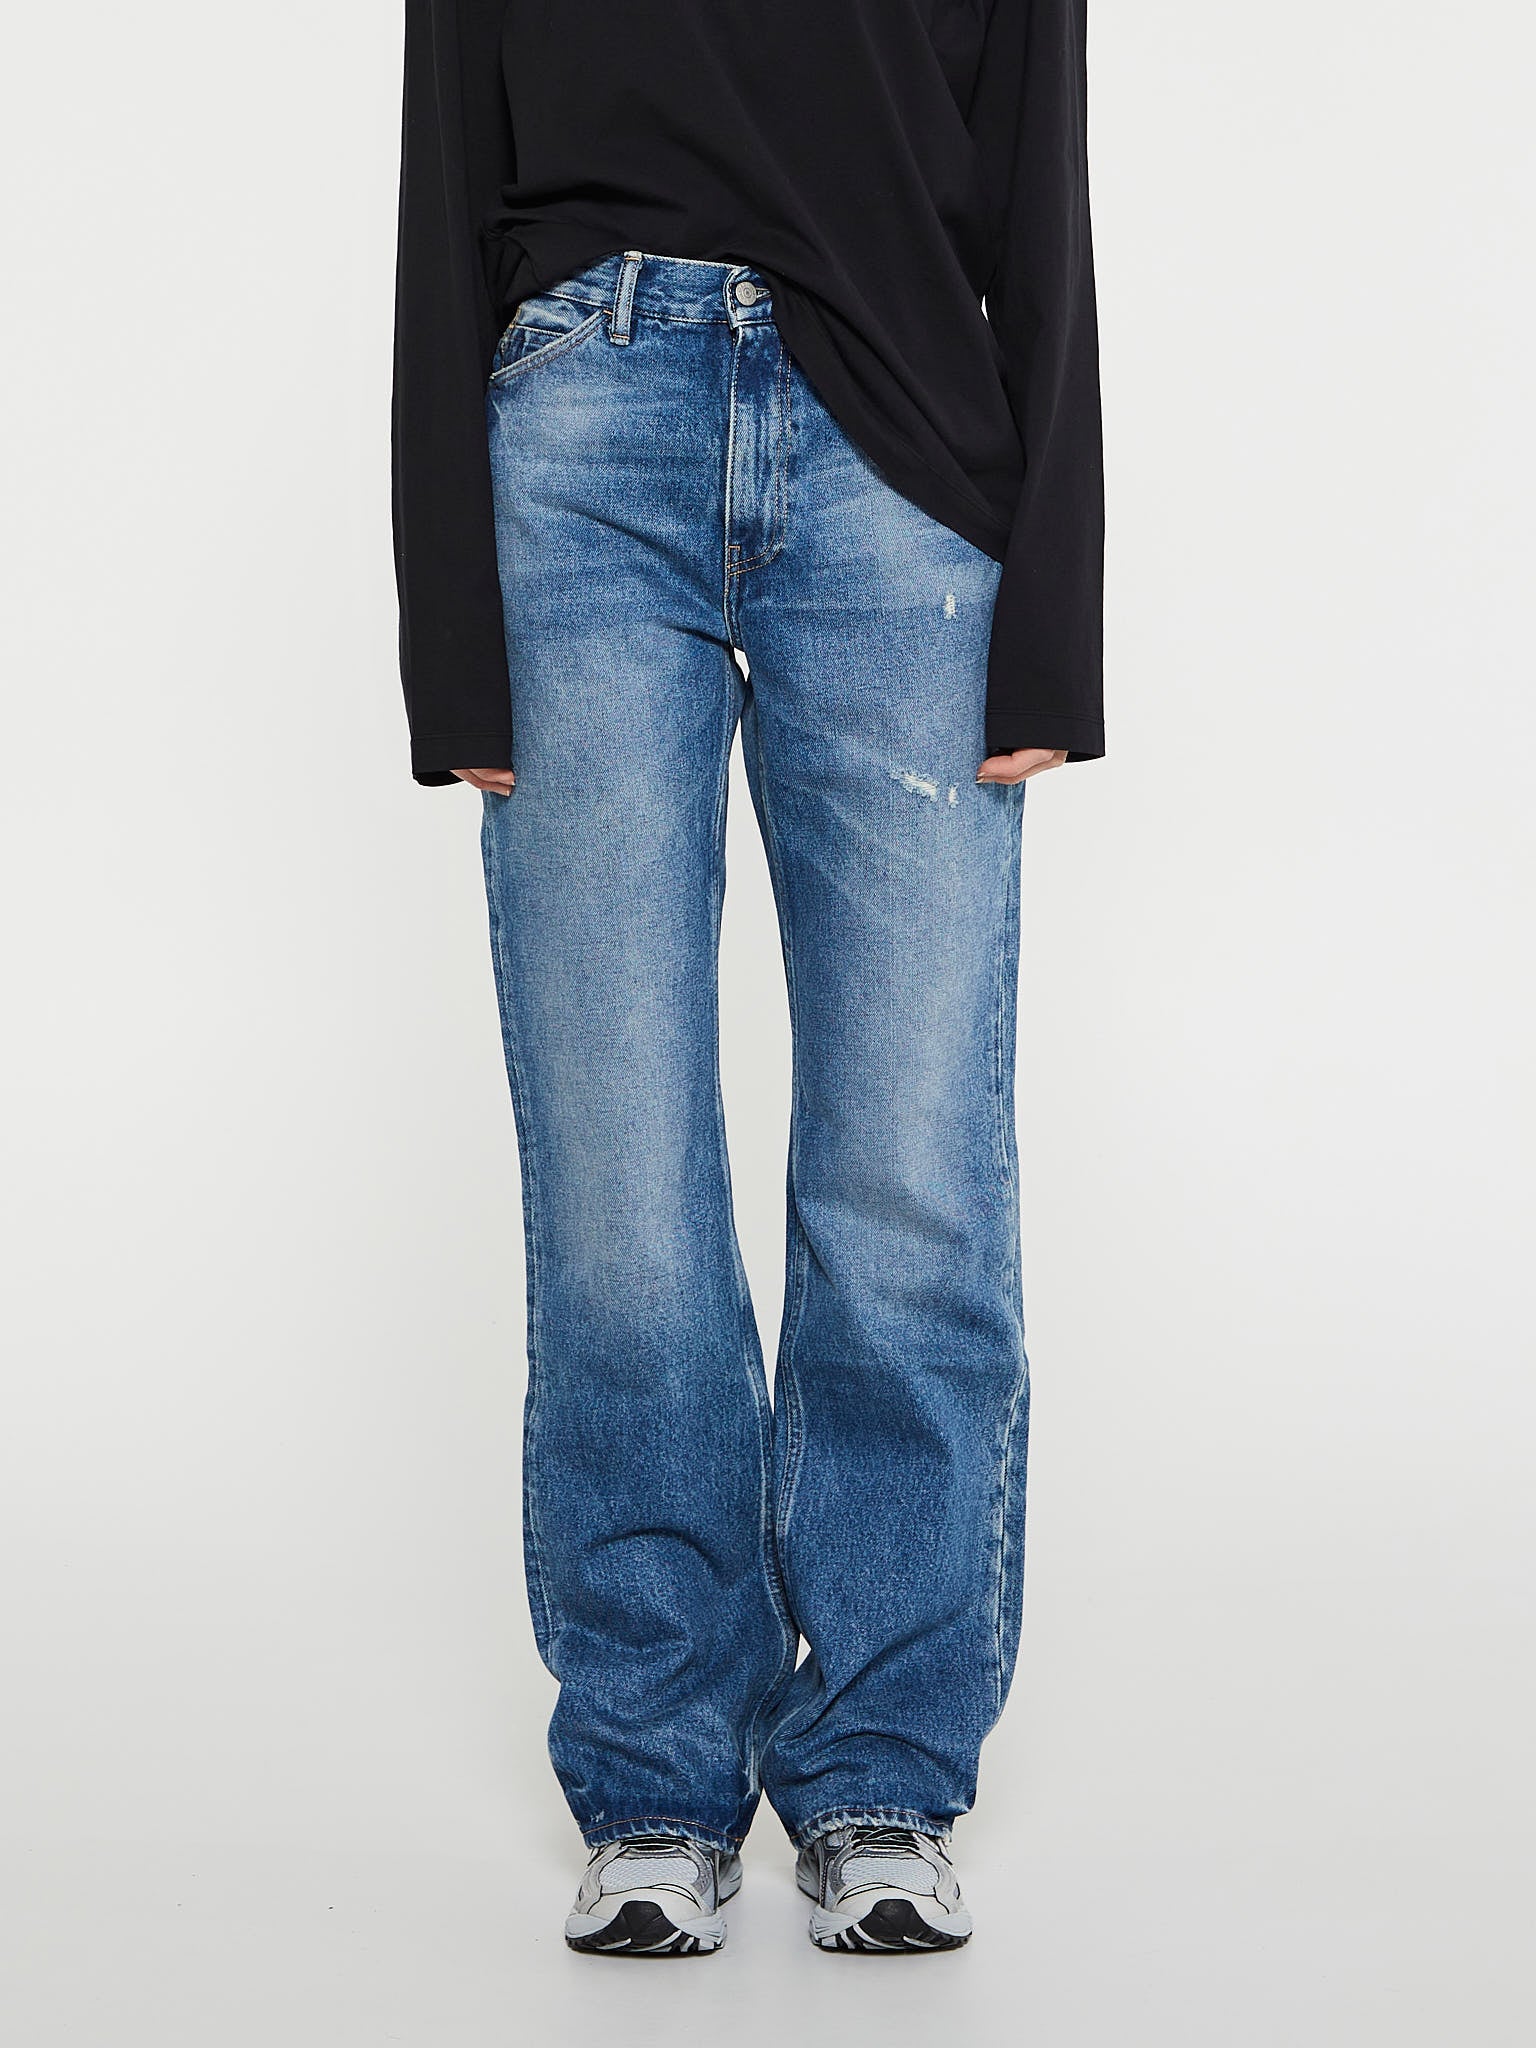 Acne Studios - 1977 Jeans in Mid Blue